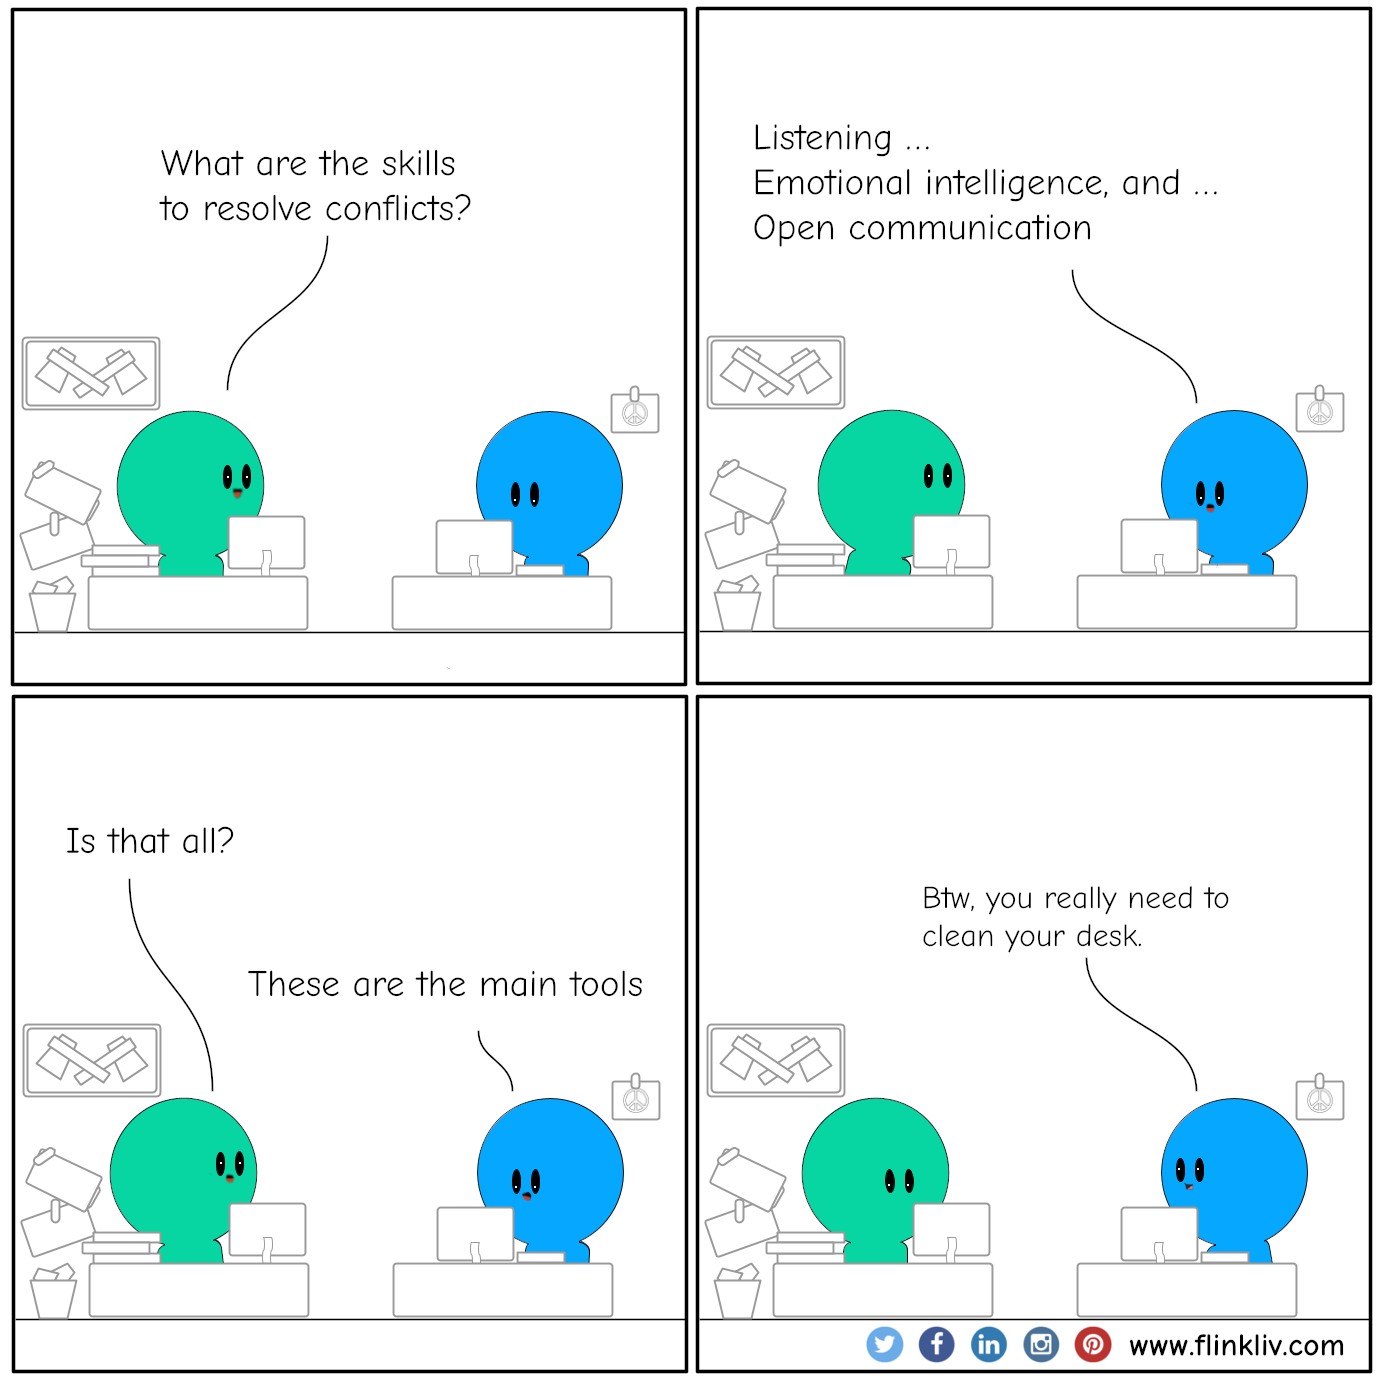 Conversation between A and B about conflict management skills. 
            A: What are the skills to resolve conflicts?
			B: Listening, emotional intelligence, and open communication.

			A: Is that all?
			B: These are the main tools.

			B: Btw, you really need to clean your desk.
			